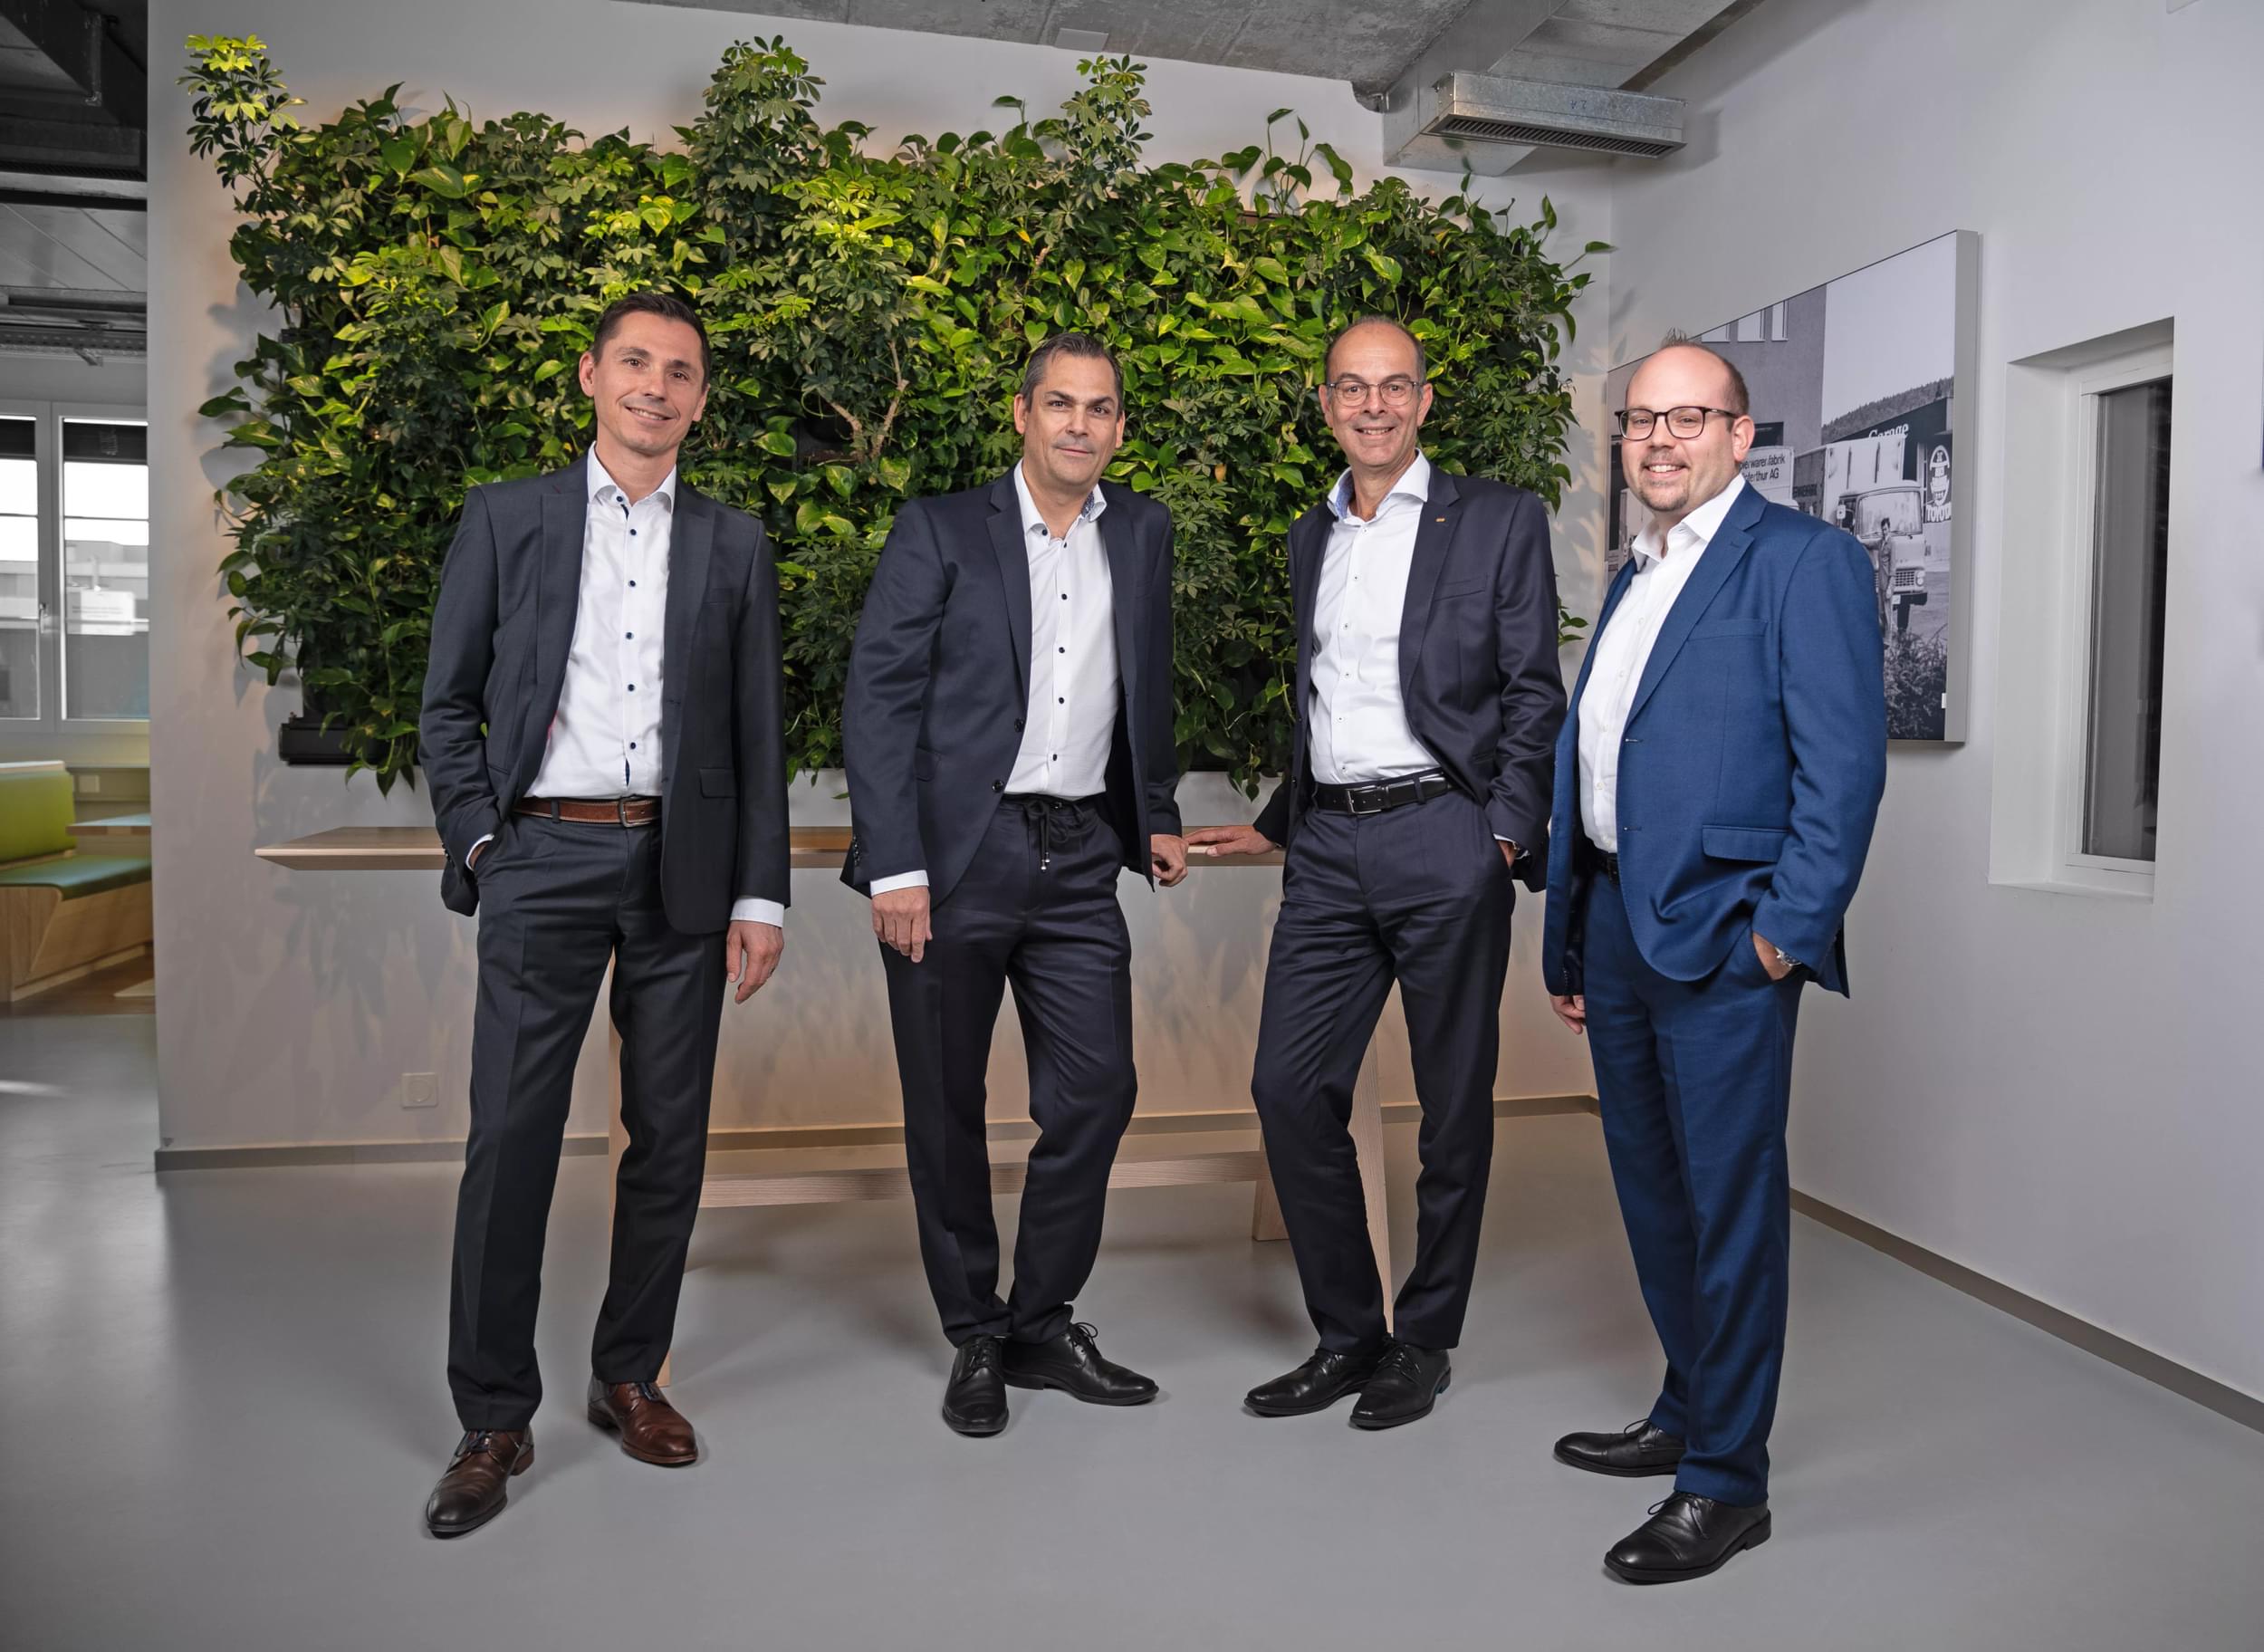 Co-CEOs PAWI Packaging Schweiz AG mit VR-Präsident PAWI  Group AG